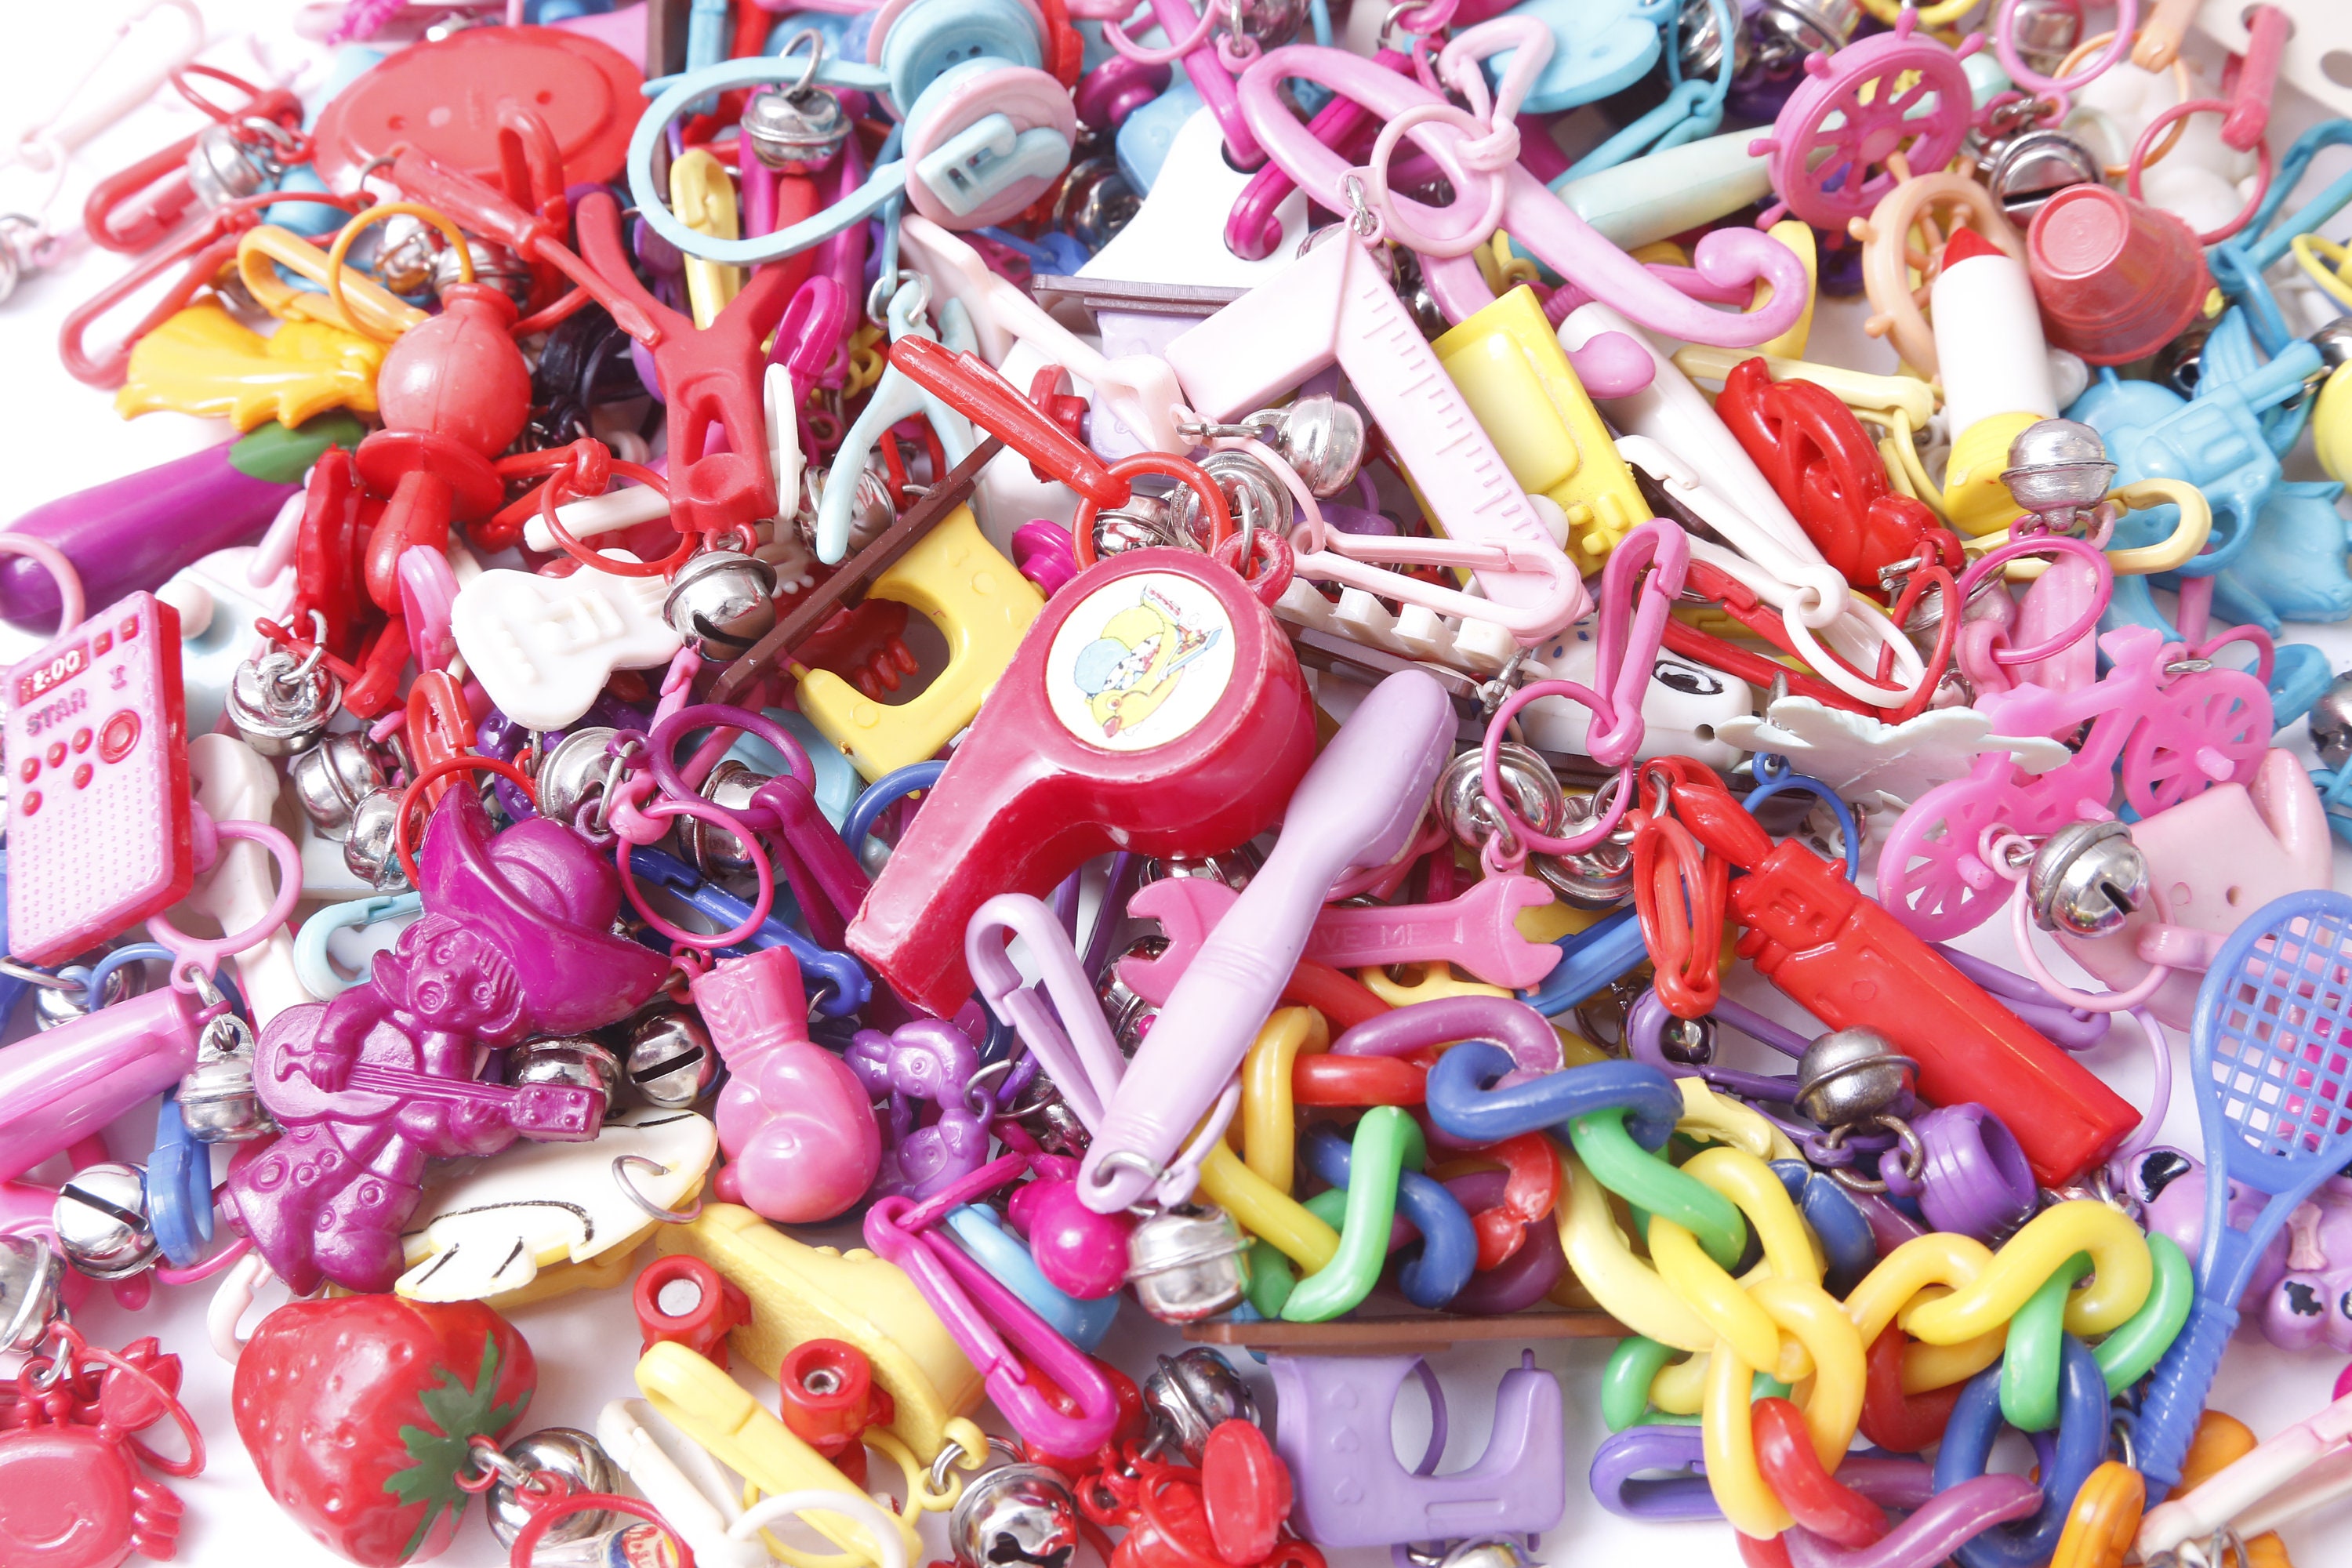 PICK YOUR OWN 1 Vintage Bell Charms, Plastic Charms, Colorful, Plastic,  Variety, Lot, Bellcharms, Charm Bracelet, 1980s, 80s 20-01-03 